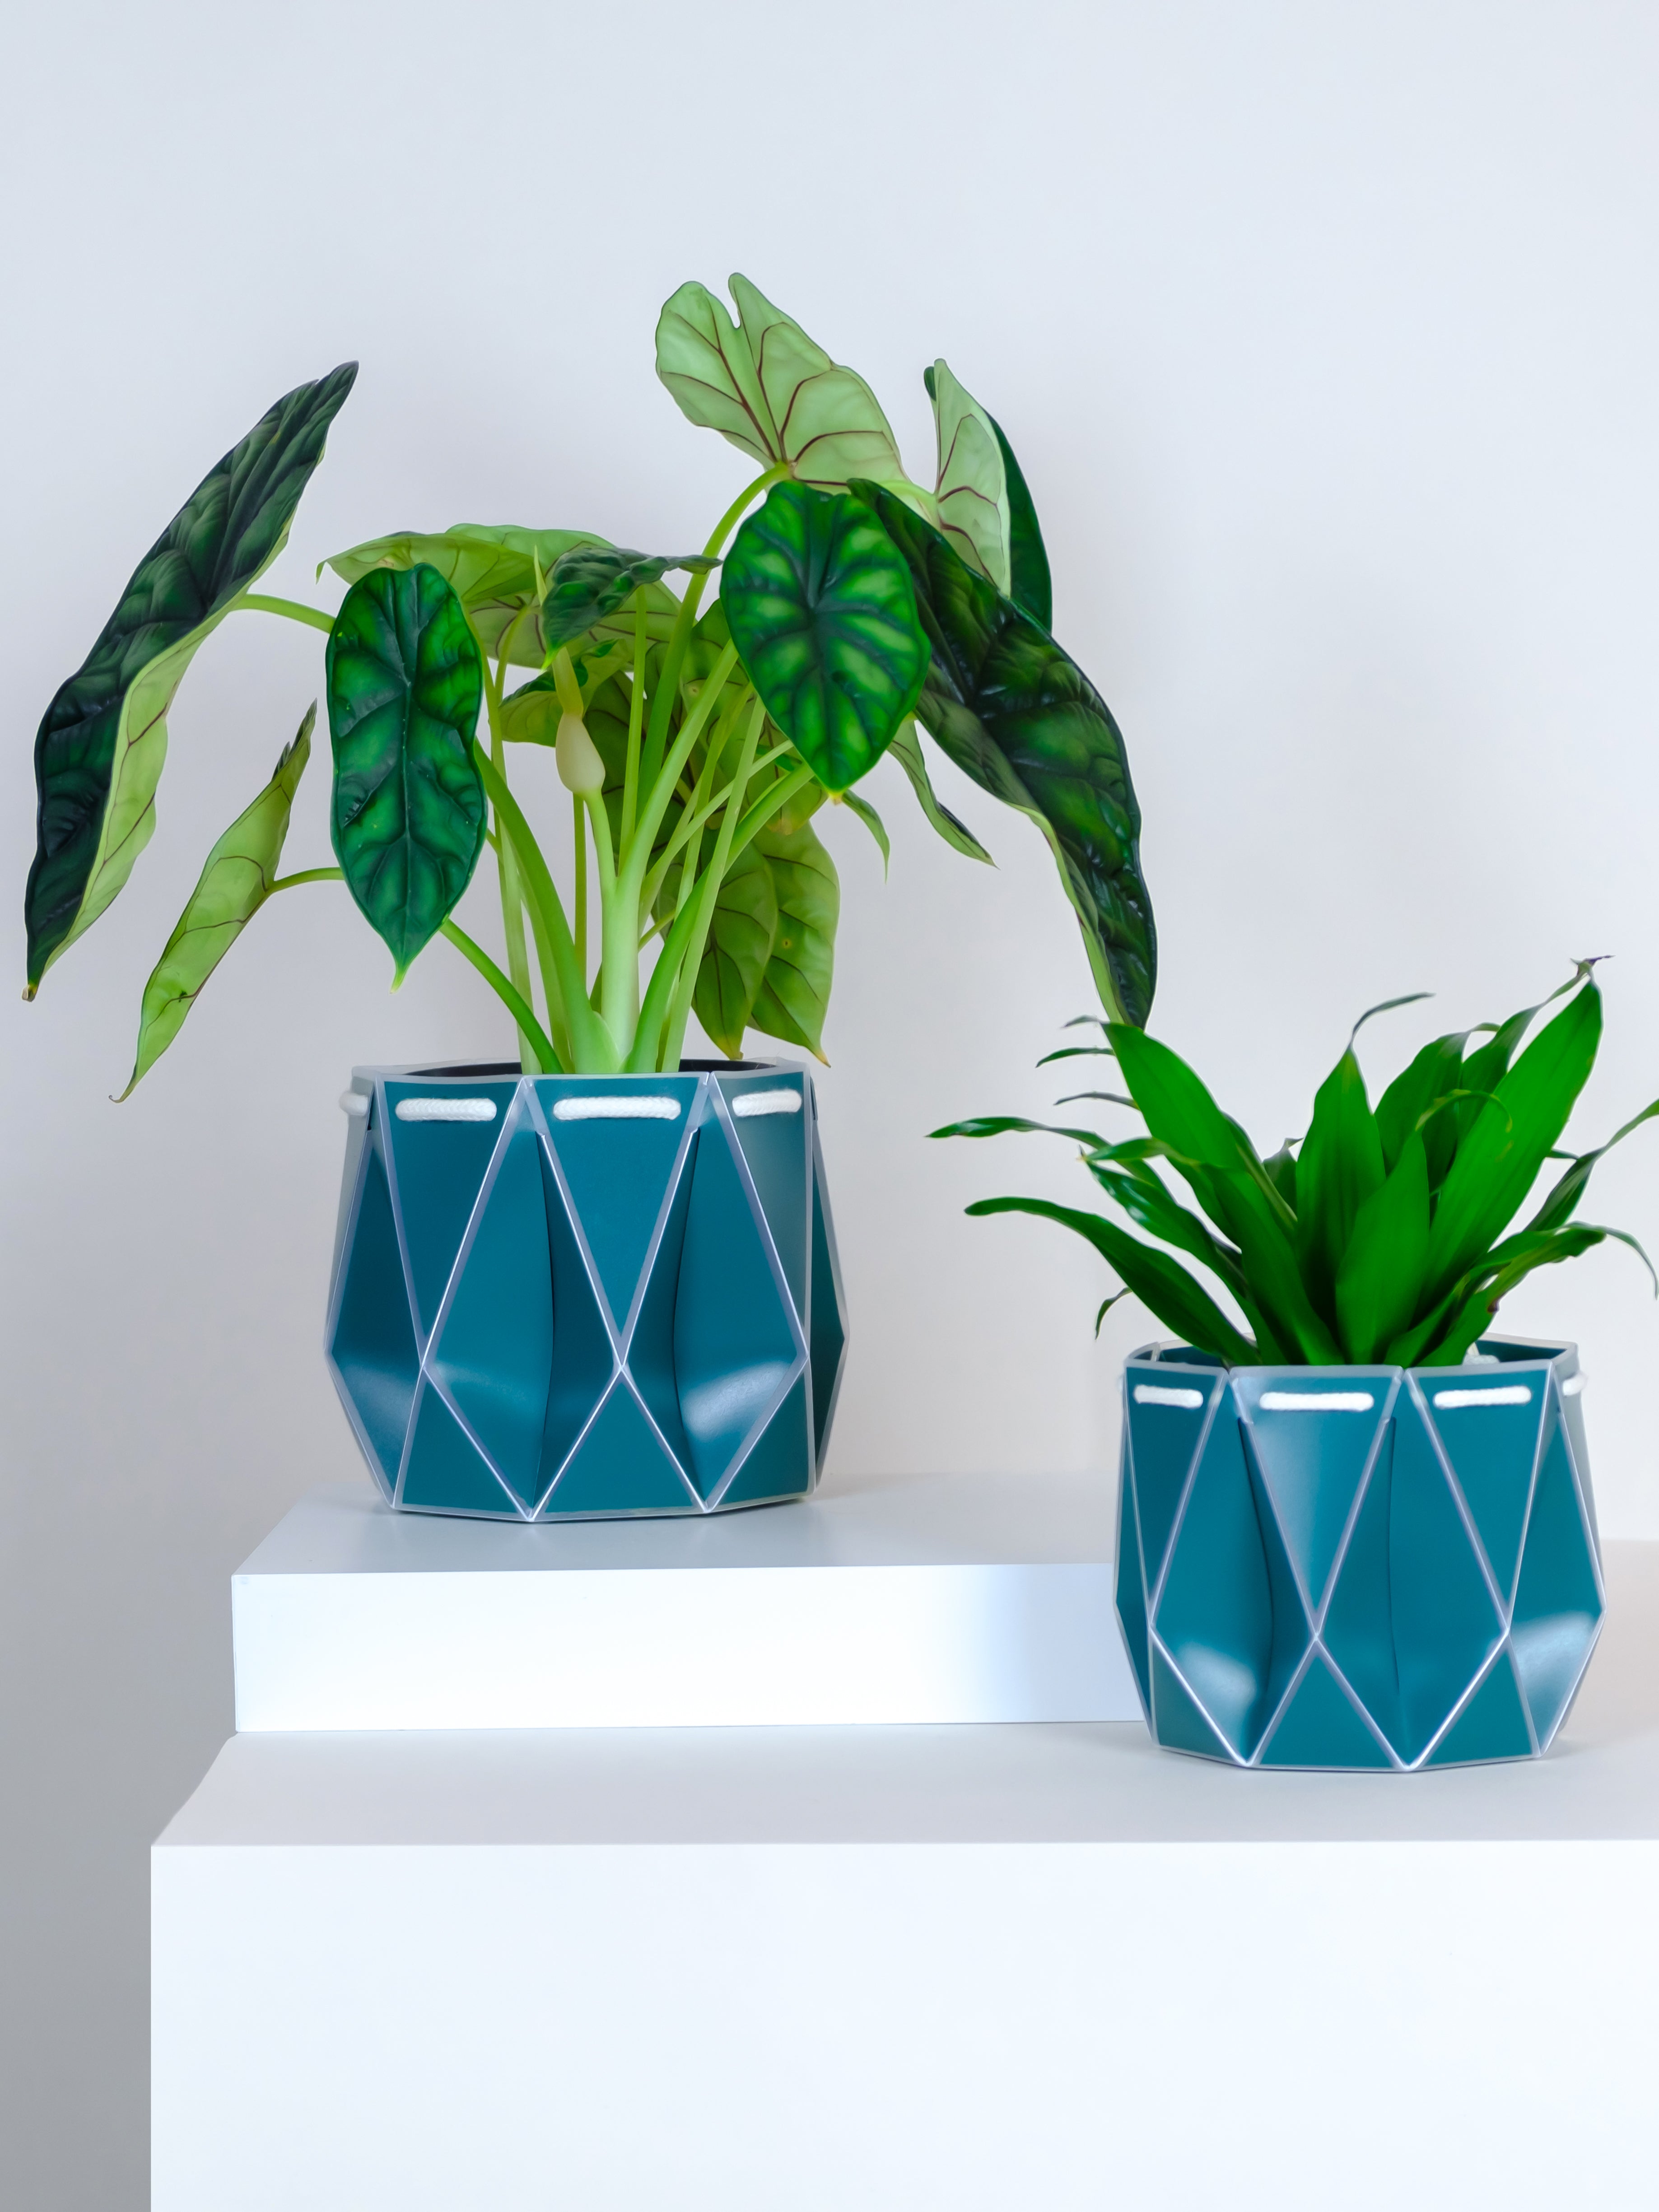 15cm and 11cm origami recycled plant pots designed to self-water. Delivered flat pack through your letterbox.